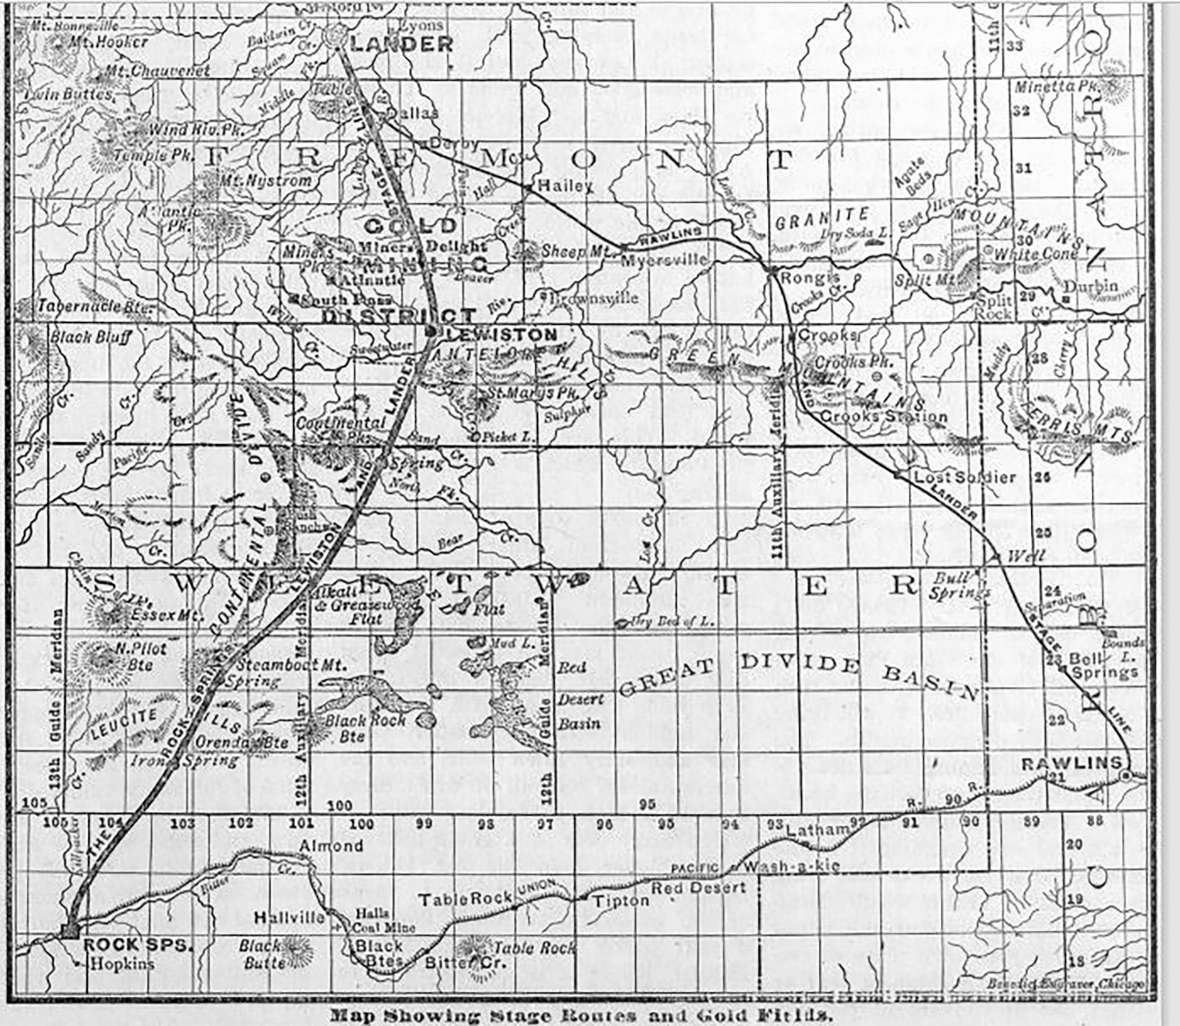 Stage lines from the Union Pacific Railroad to Lander, Wyoming, ca. 1895. Routes from Bryan, Green River and, shown on this map, Rock Springs through the gold districts at South Pass saw less and less use over the years as the mines played out. The route from Rawlins, on the southeast, steadily gained traffic until a new railroad to Lander was completed in 1906. The Rawlins route ran through Bell Springs, Bull Springs and Lost Soldier, then through the Green Mountains at Crook’s Gap to the Sweetwater River at Rongis. The road left the Sweetwater after Meyersville and dropped down over Beaver Rim to Hailey and Dallas, on to Lander and finally, Fort Washakie. Author’s collection. Click to enlarge. 